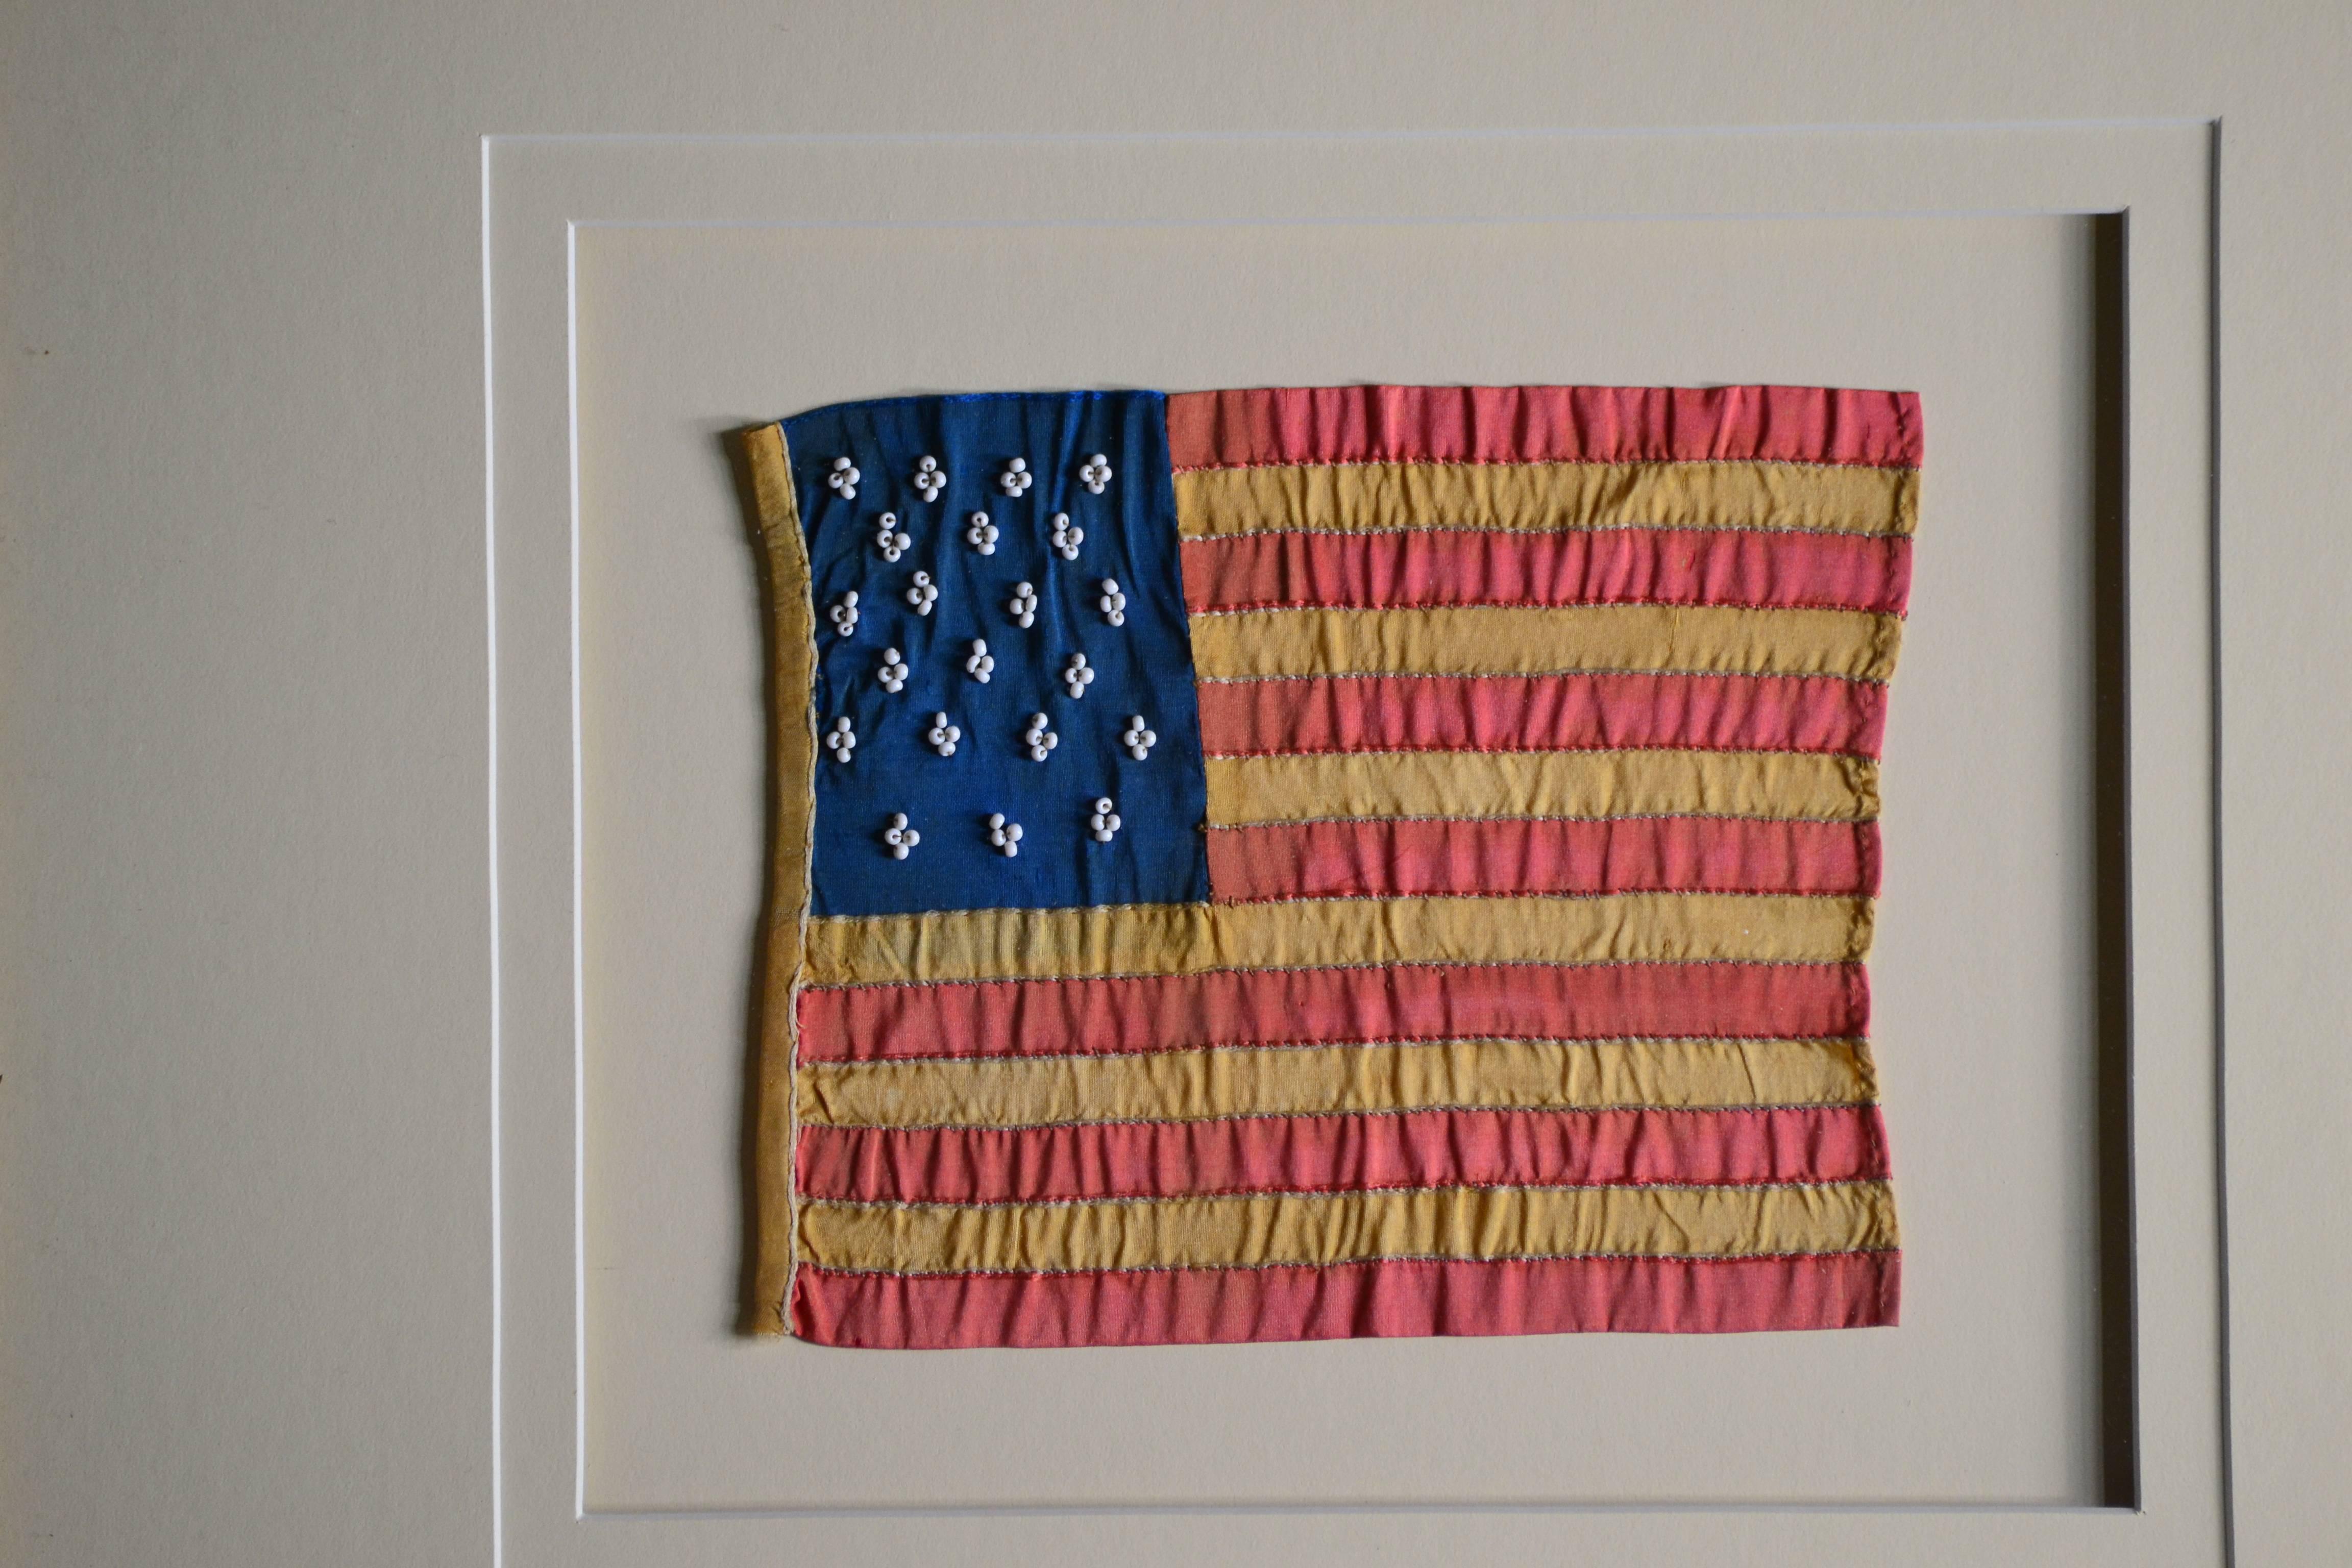 Incredible handmade 21 star flag. The flag is made of silk. Individual hand cut and hand sewn stripes to a fine blue silk canton. Each of the 21 stars is made of four very tiny glass beads hand stitched on with meticulous precision. The hoist side